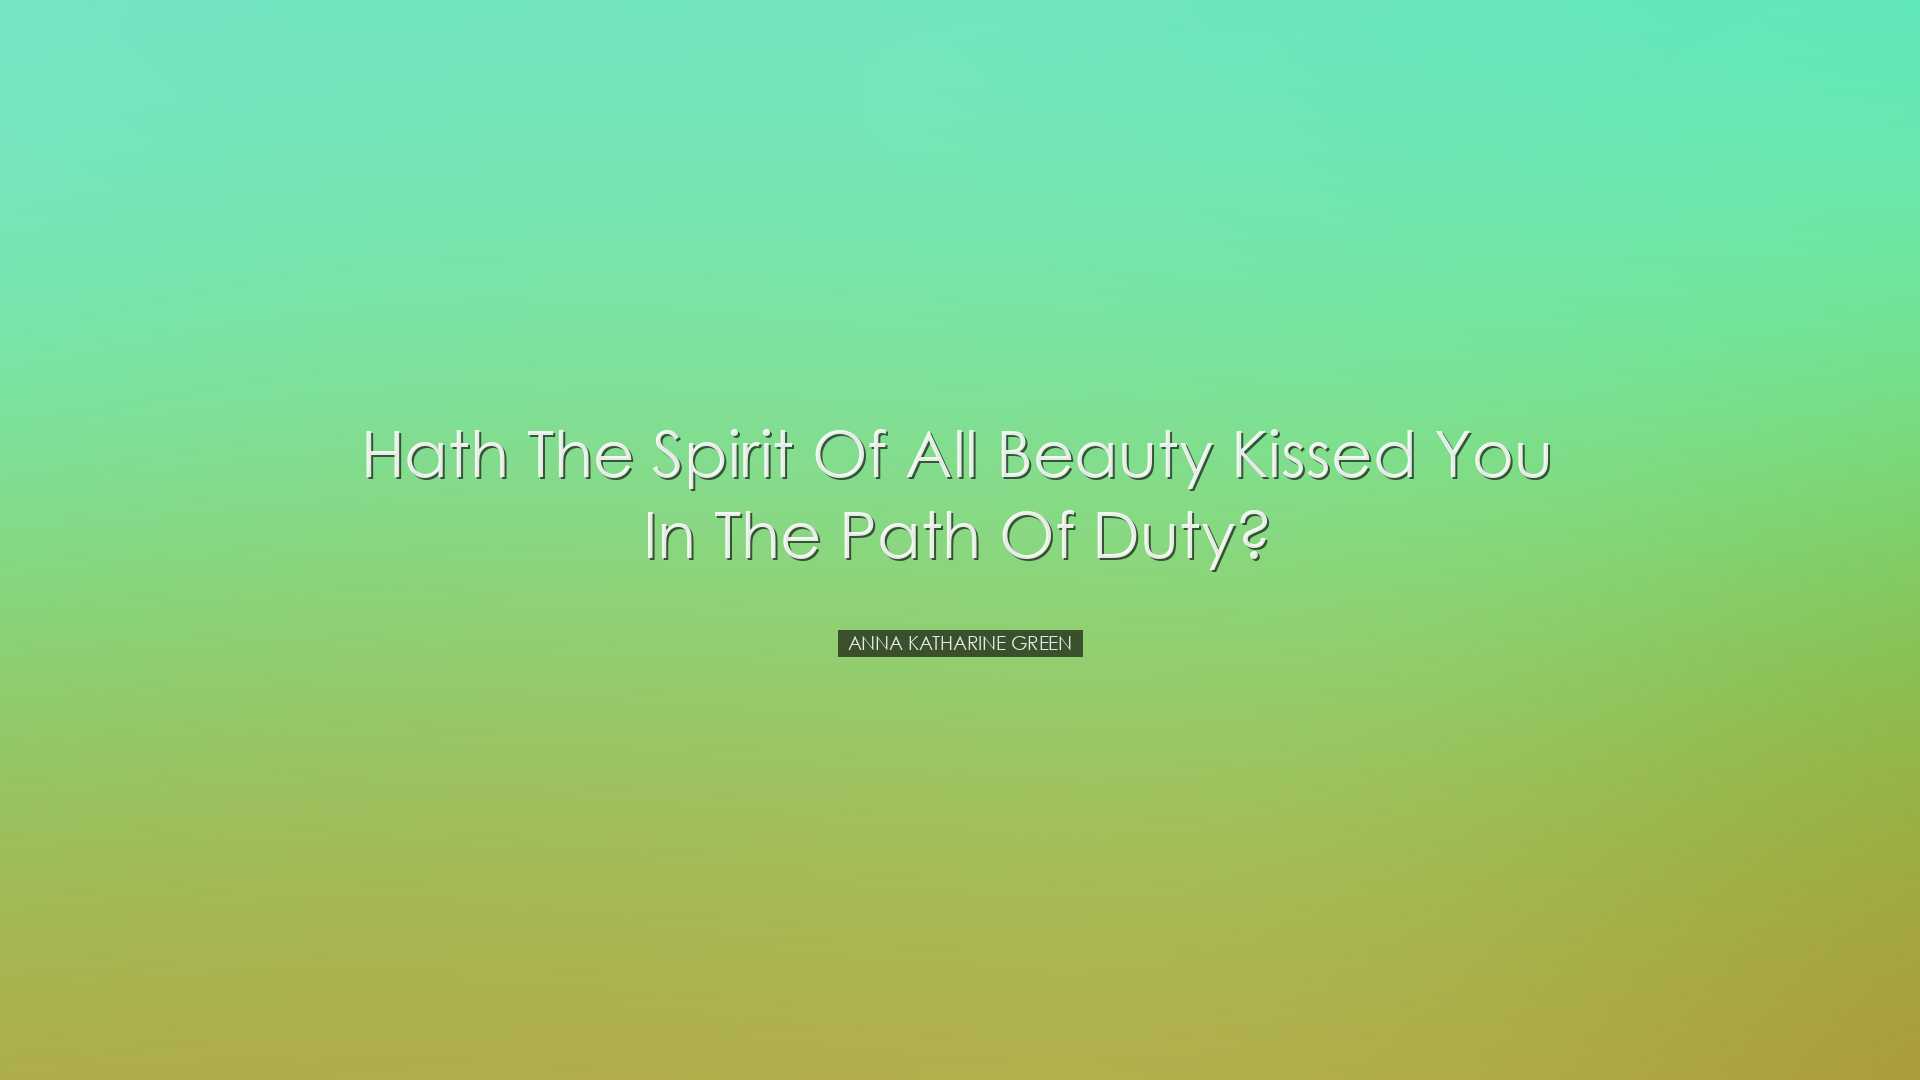 Hath the spirit of all beauty Kissed you in the path of duty? - An